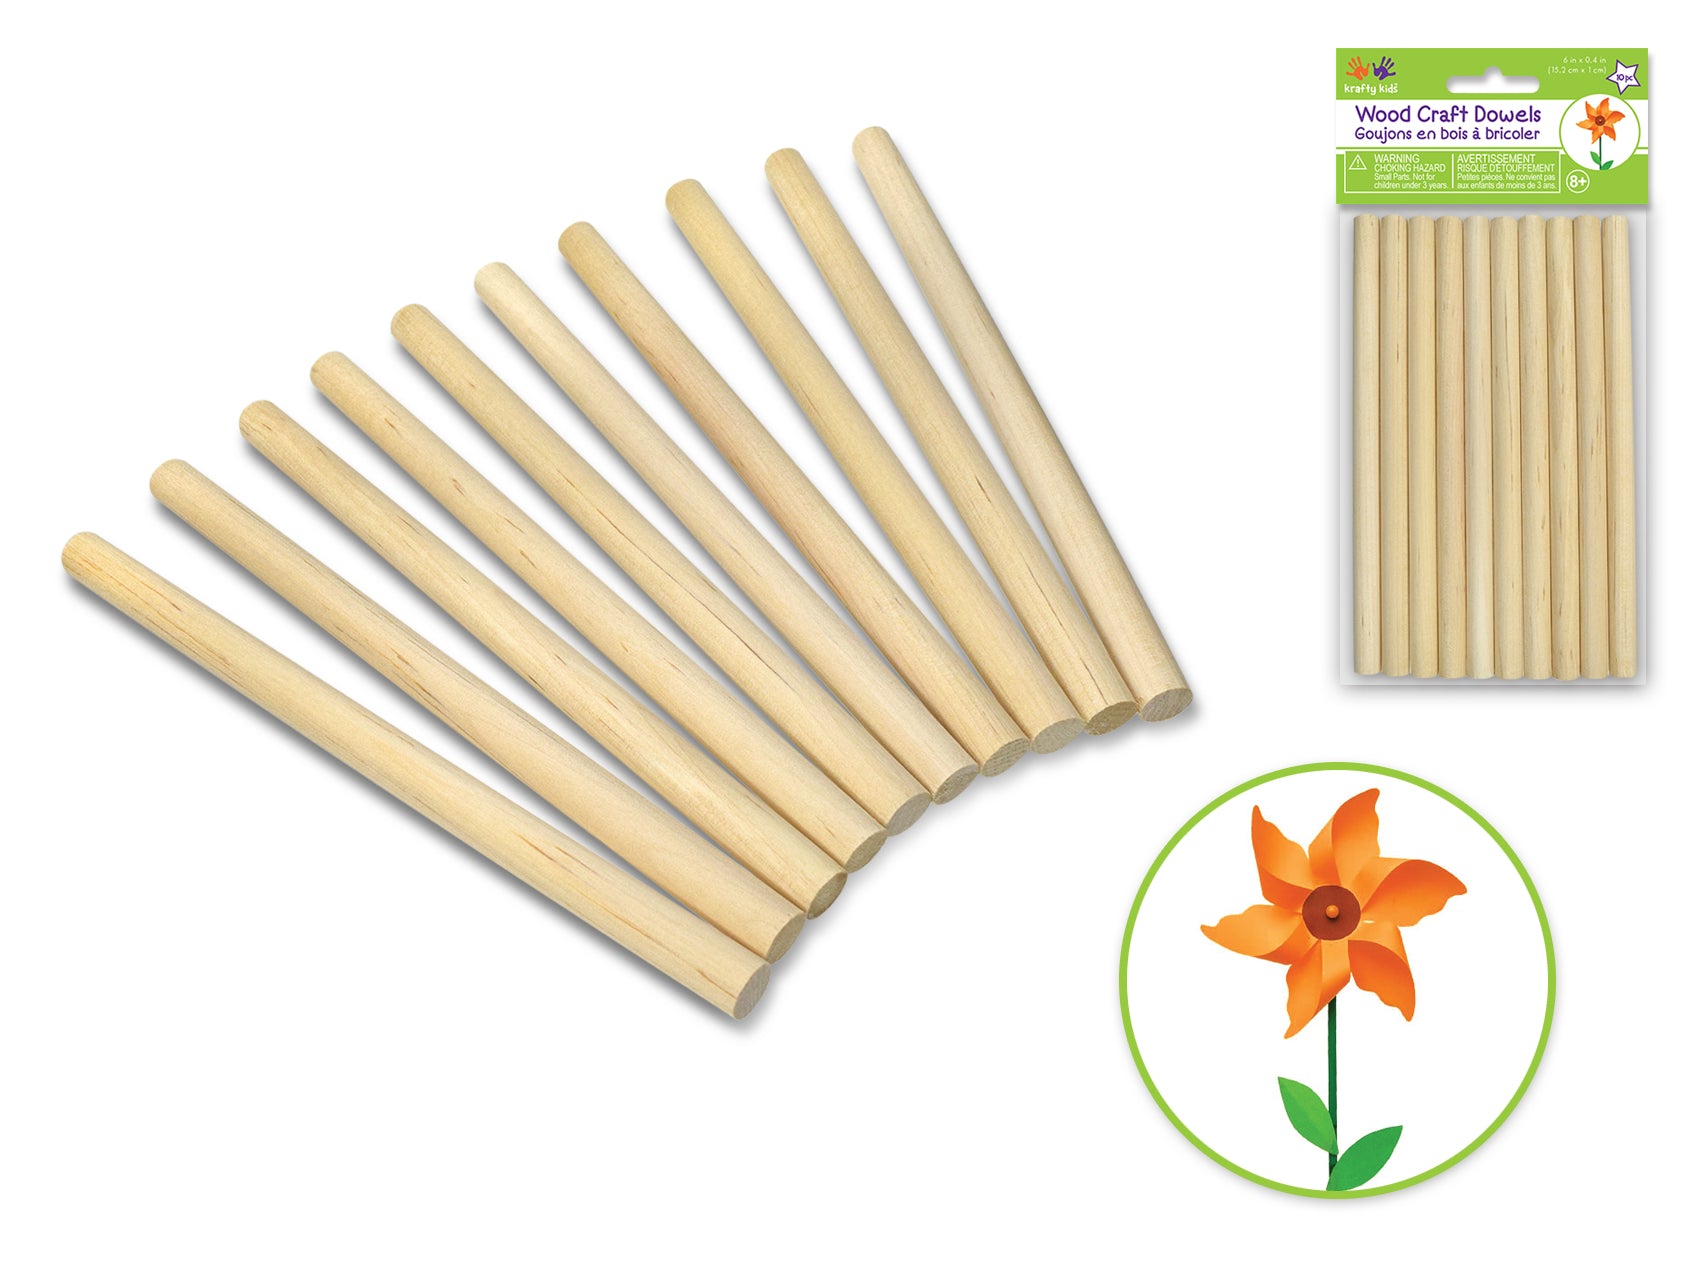 Craftwood Natural Dowel, 3/8"x6", Pack of 10